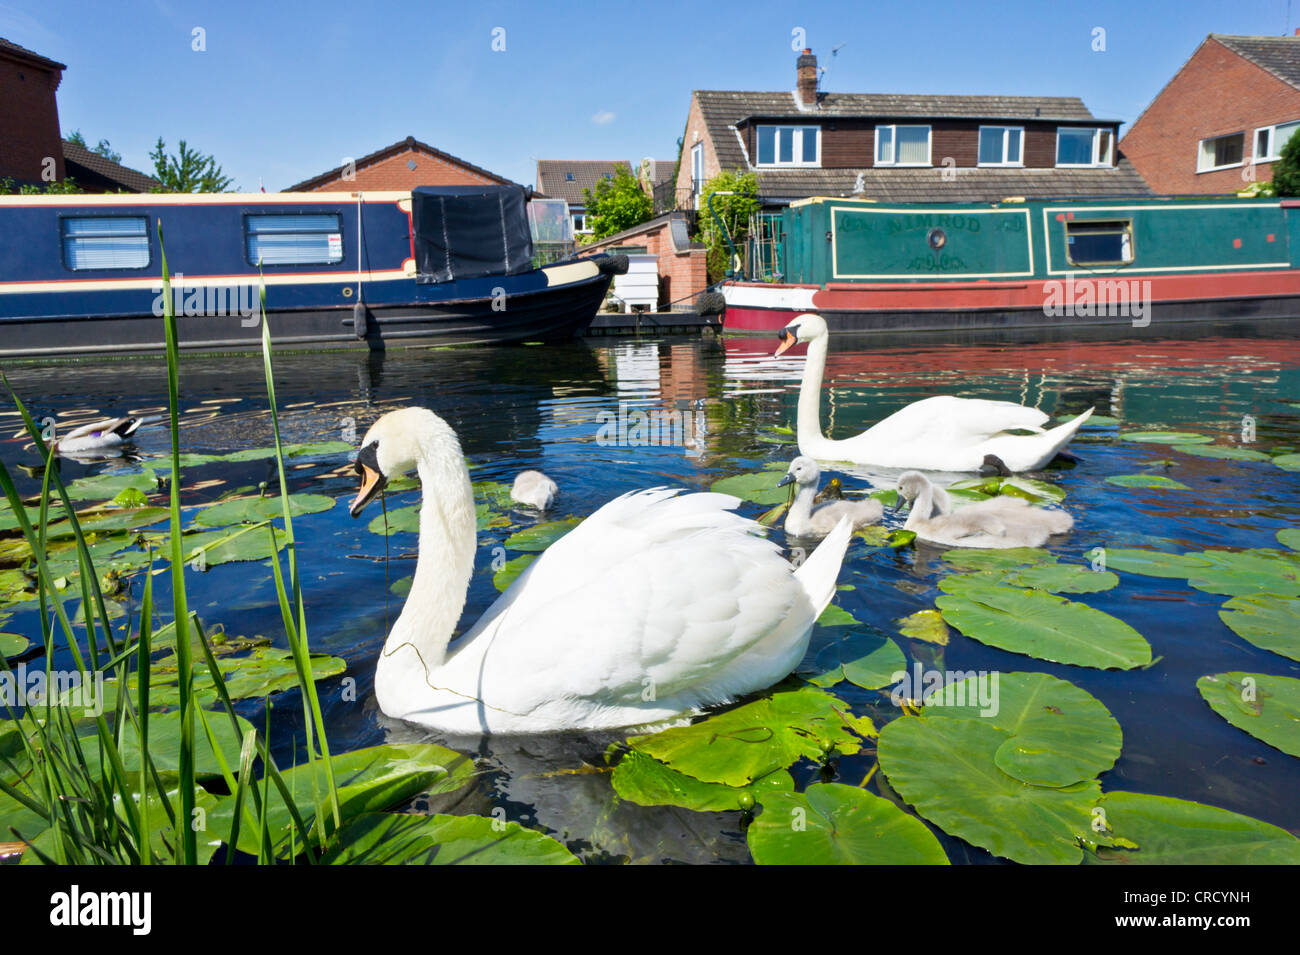 Two adult Swans and young cygnets on the Erewash canal near Long Eaton, Derbyshire, England, GB, UK, EU, Europe Stock Photo